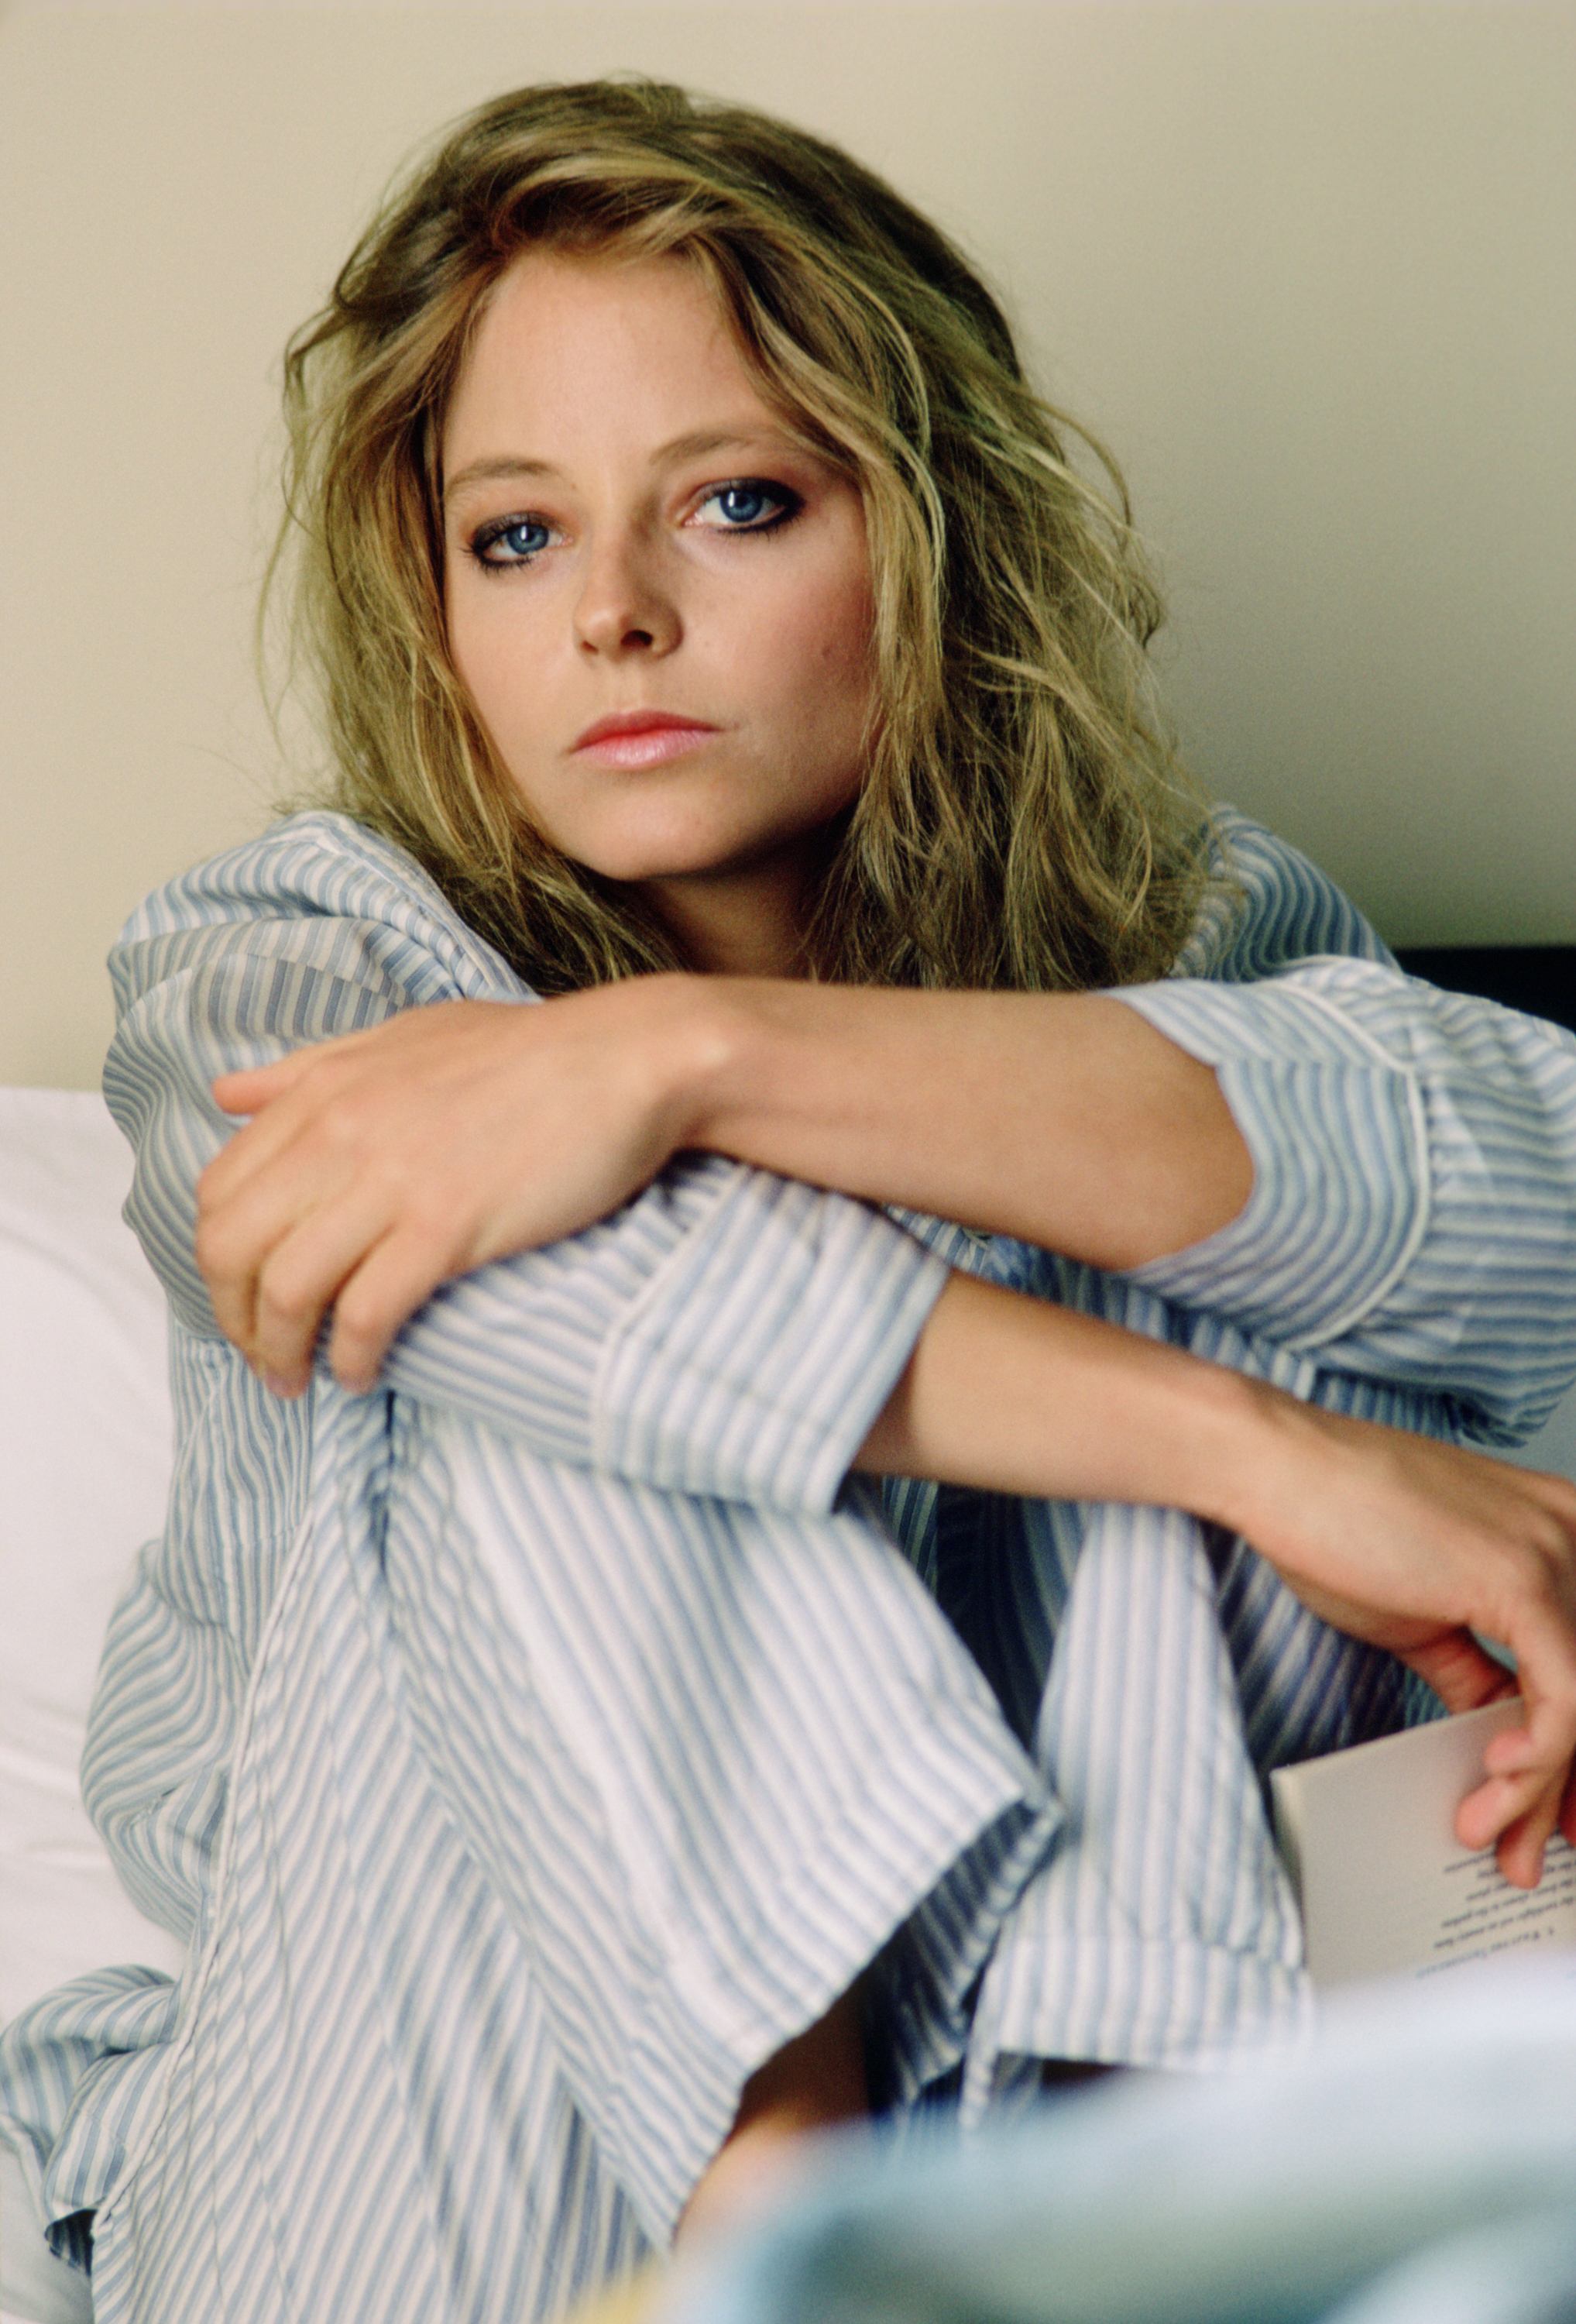 Jodie Foster as her character from "The Accused" in Vancouver, 1987 | Source: Getty Images